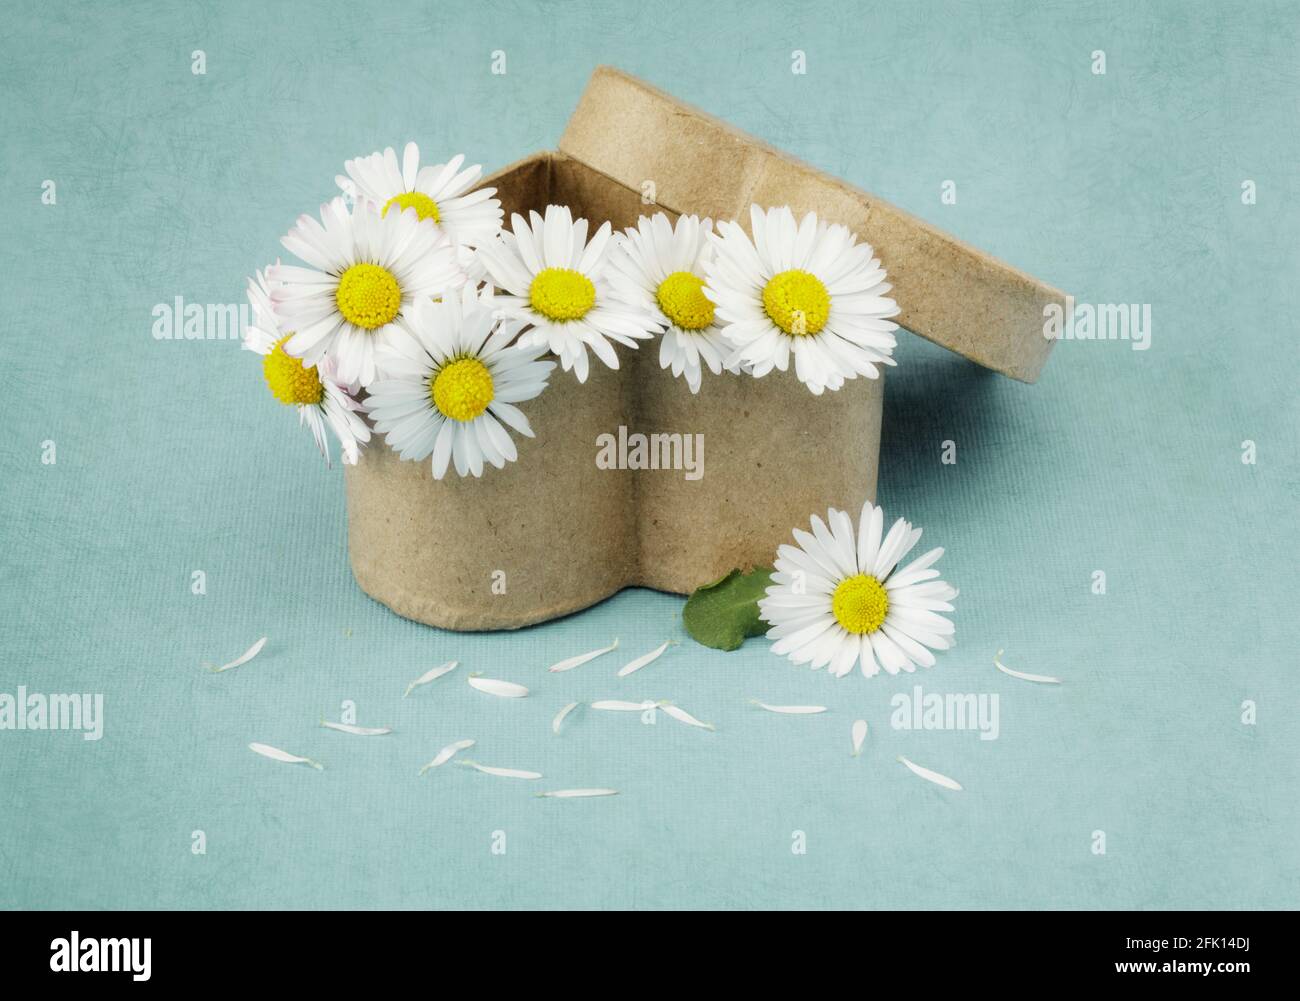 Mini Daisies in a heart shaped gift box Stock Photo